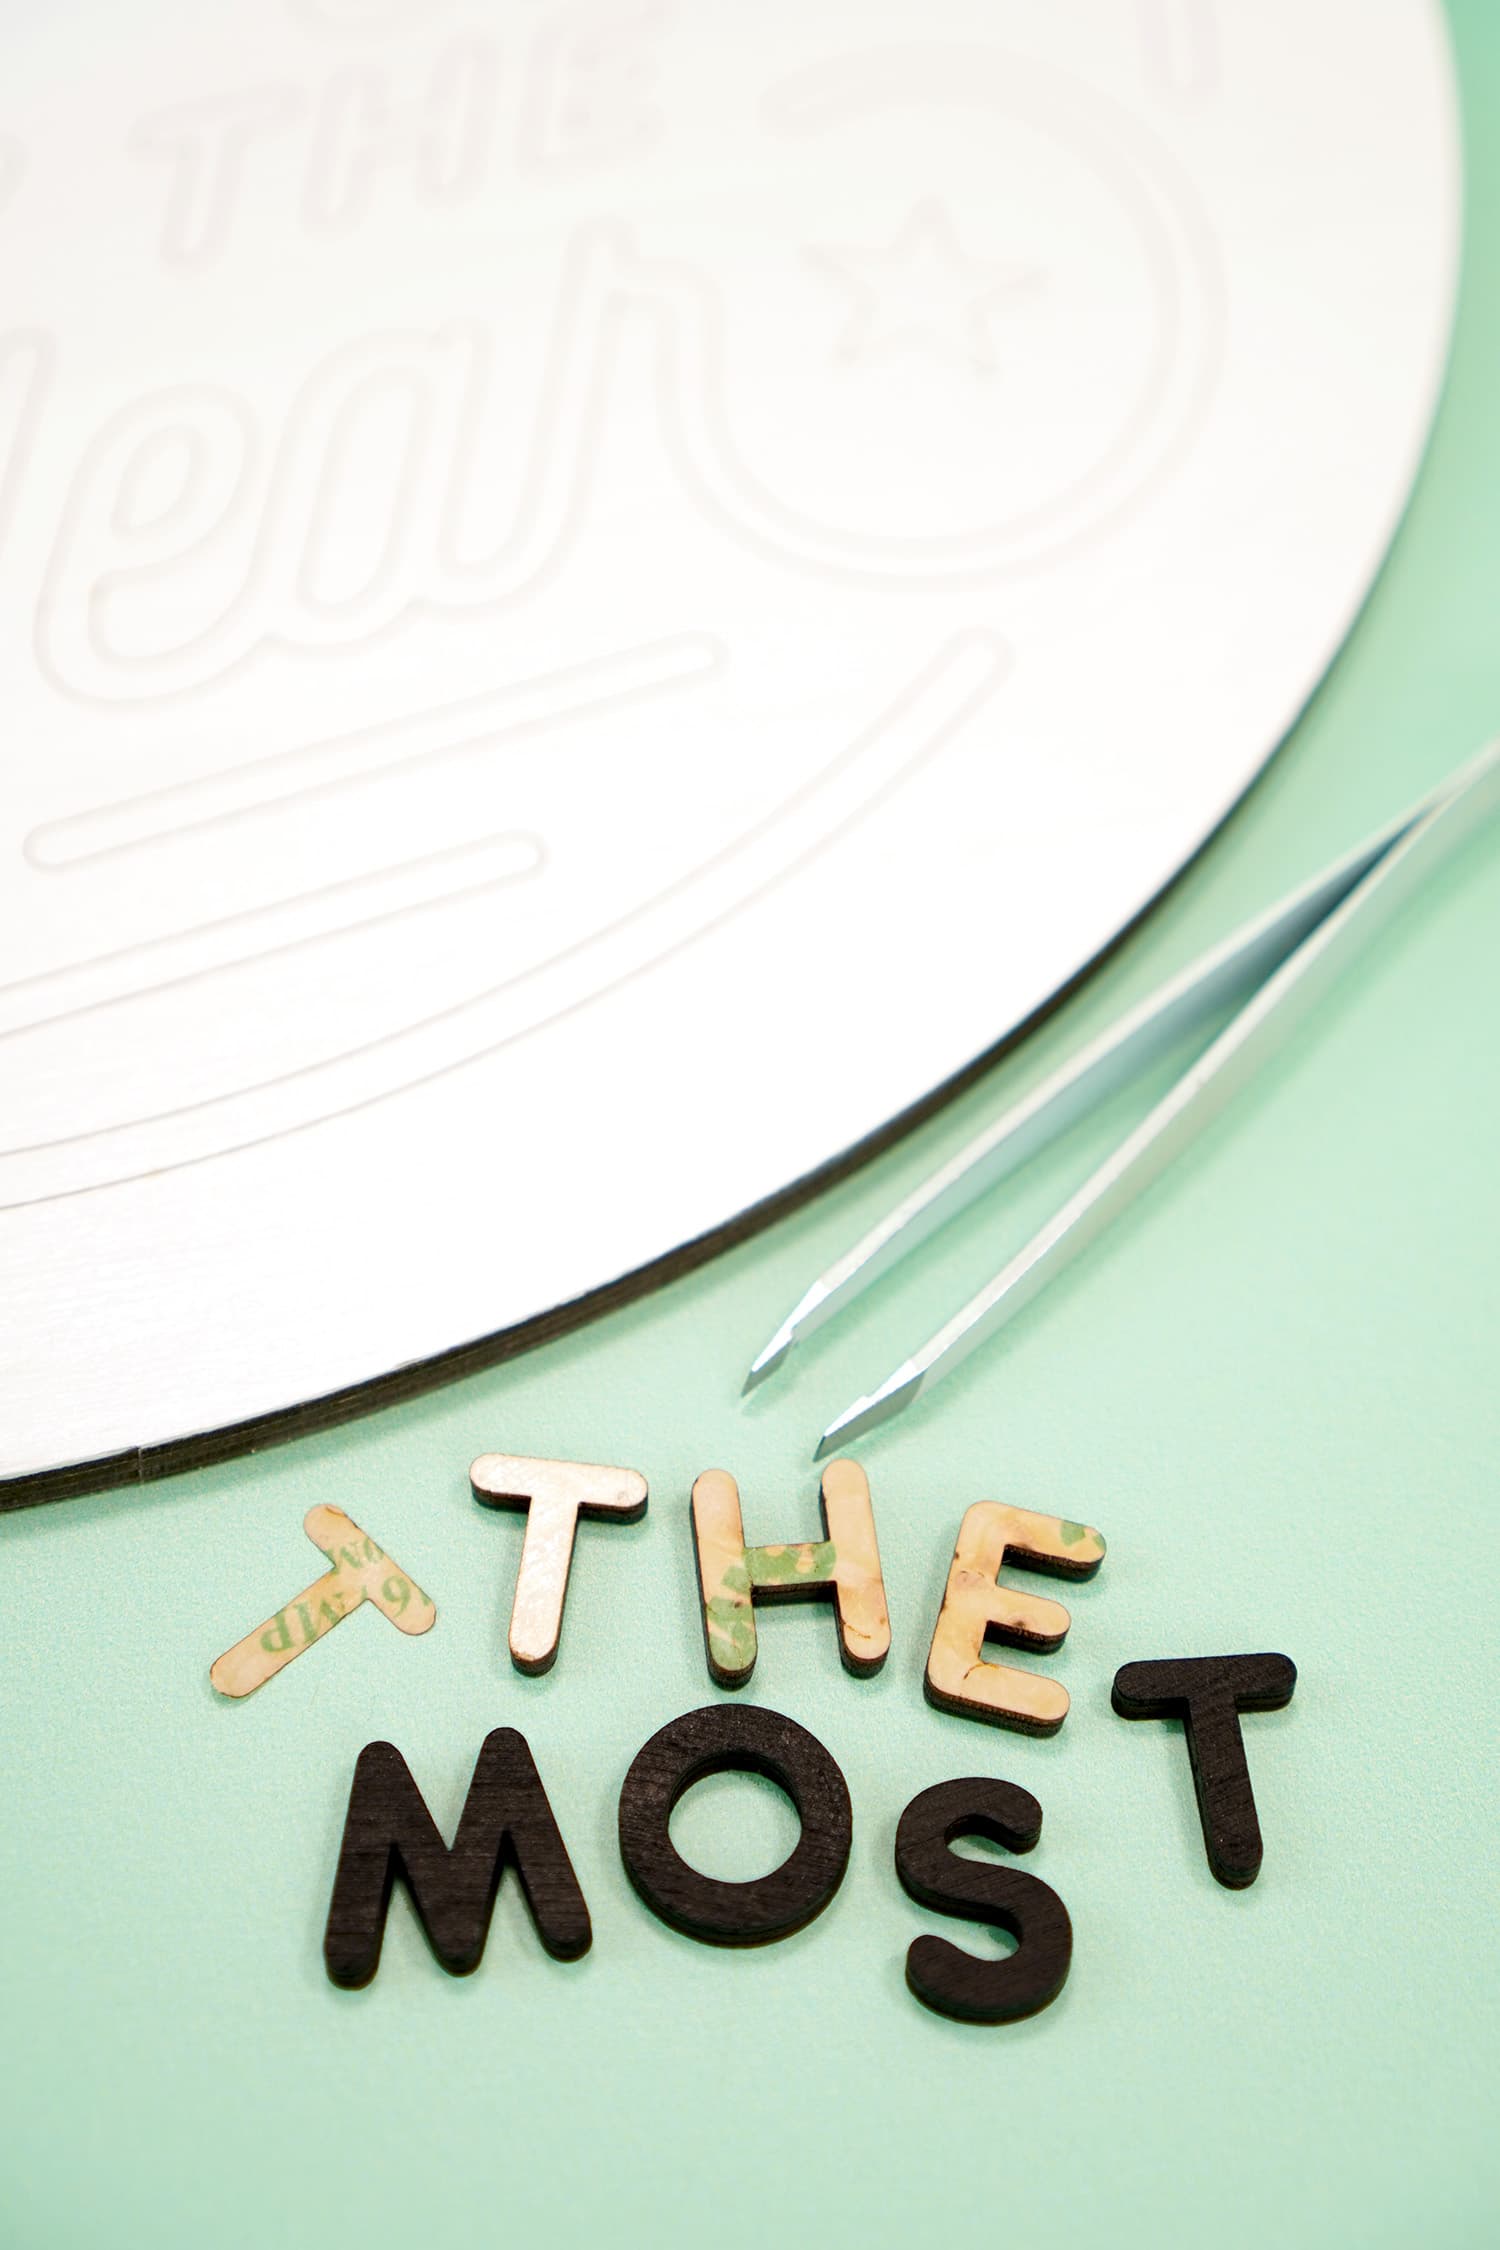 Make Laser Cut Wood Signs the EASY Way! - Happiness is Homemade